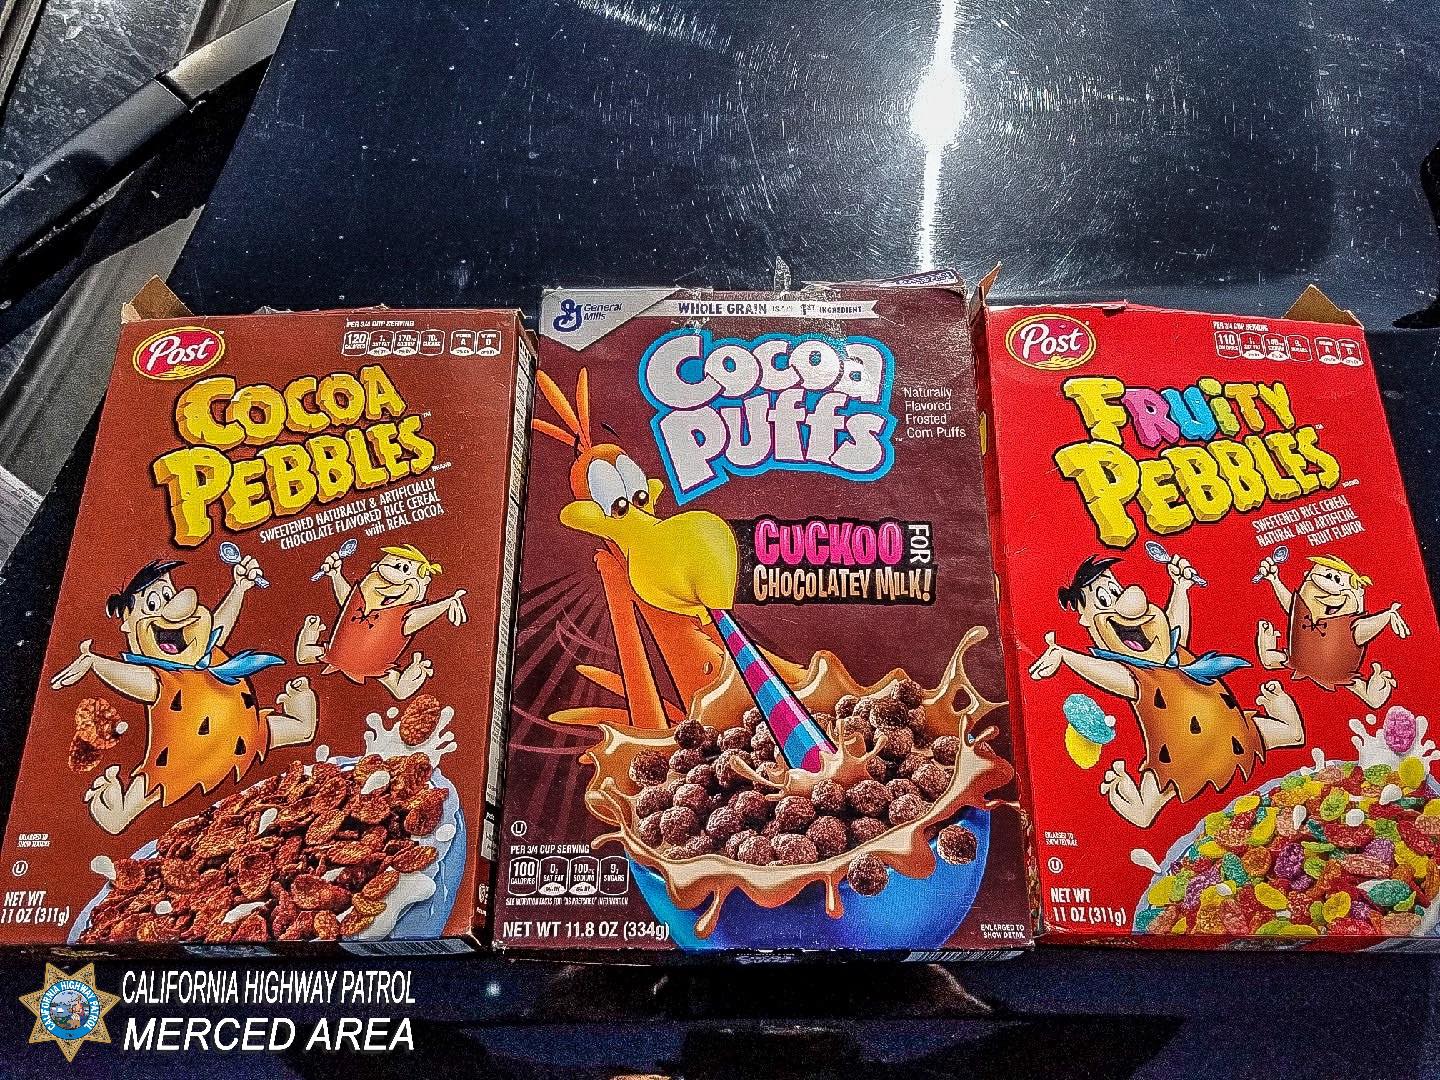 The cereal boxes officers found. Nothing too suspicious, right? (Credit: CHP Merced)